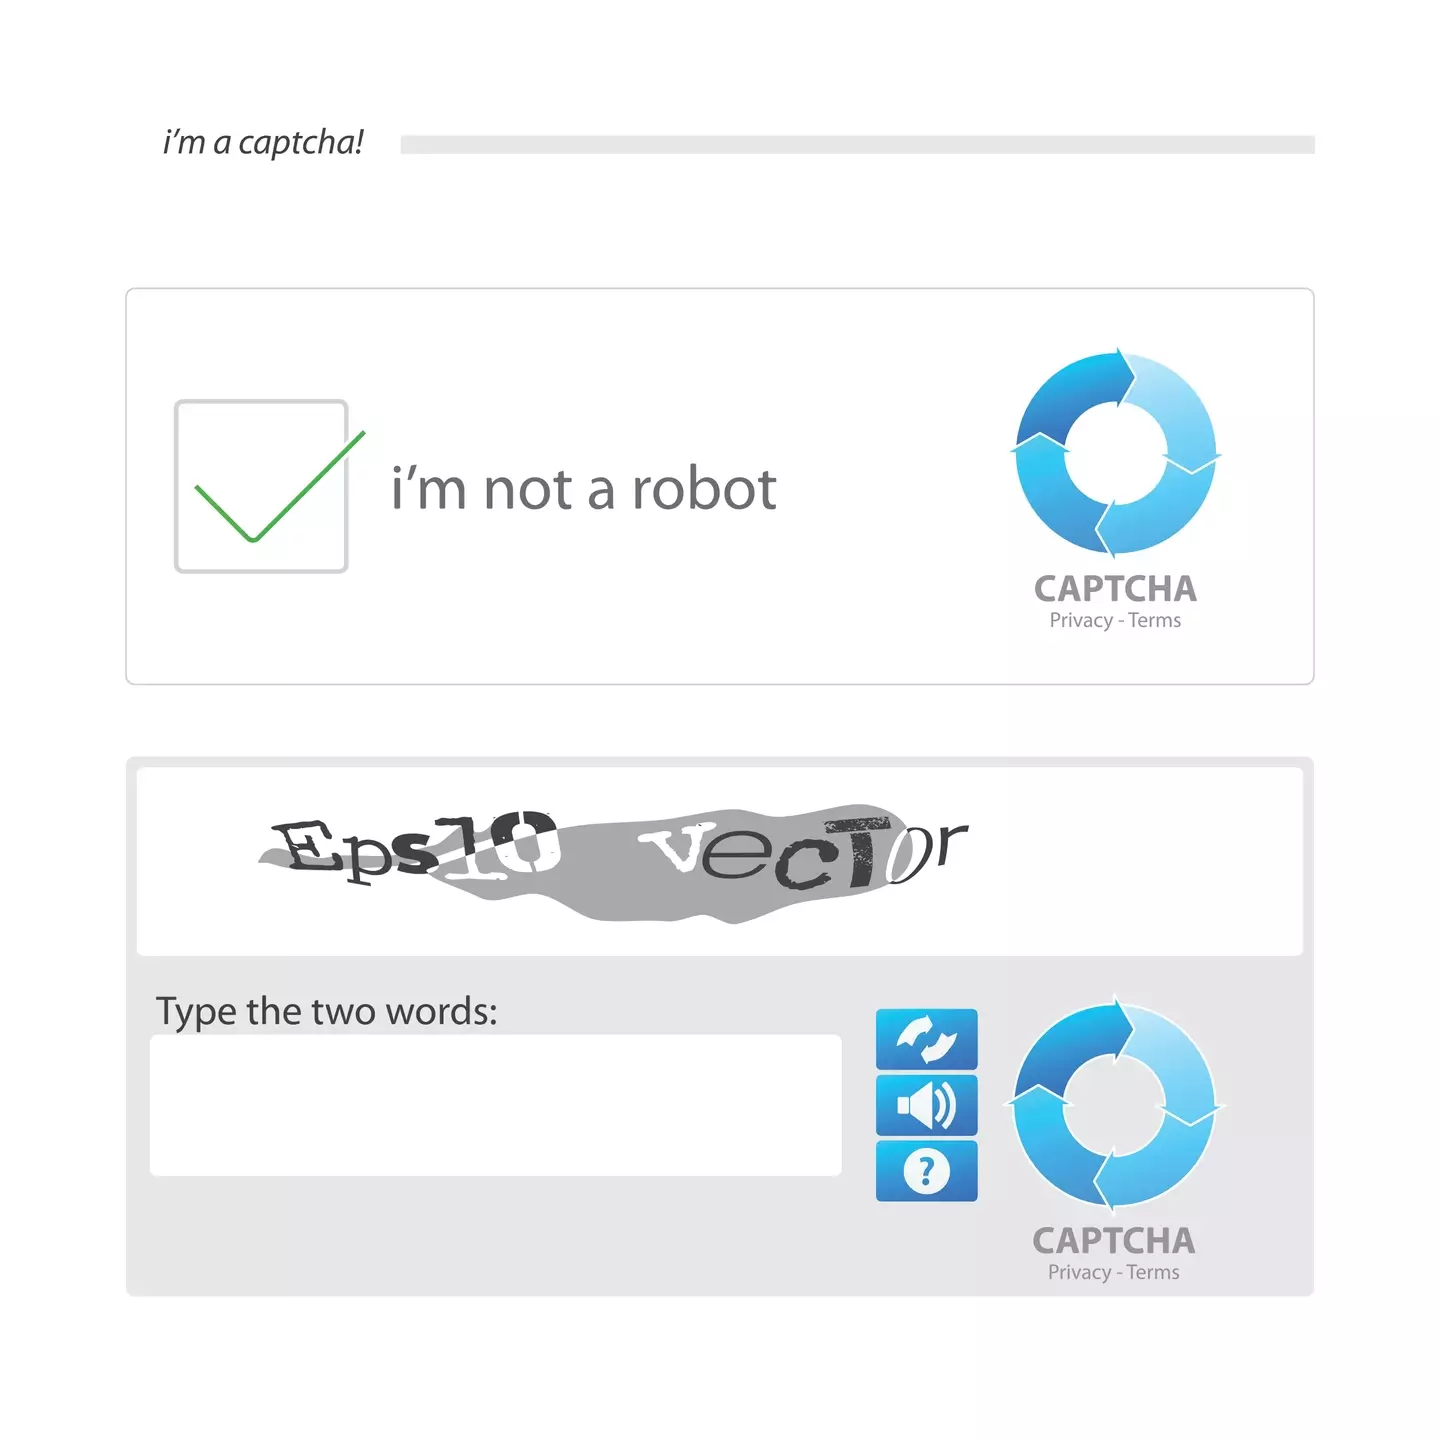 Ever wondered what clicking that' I'm not a robot' button actually does? Now you know!